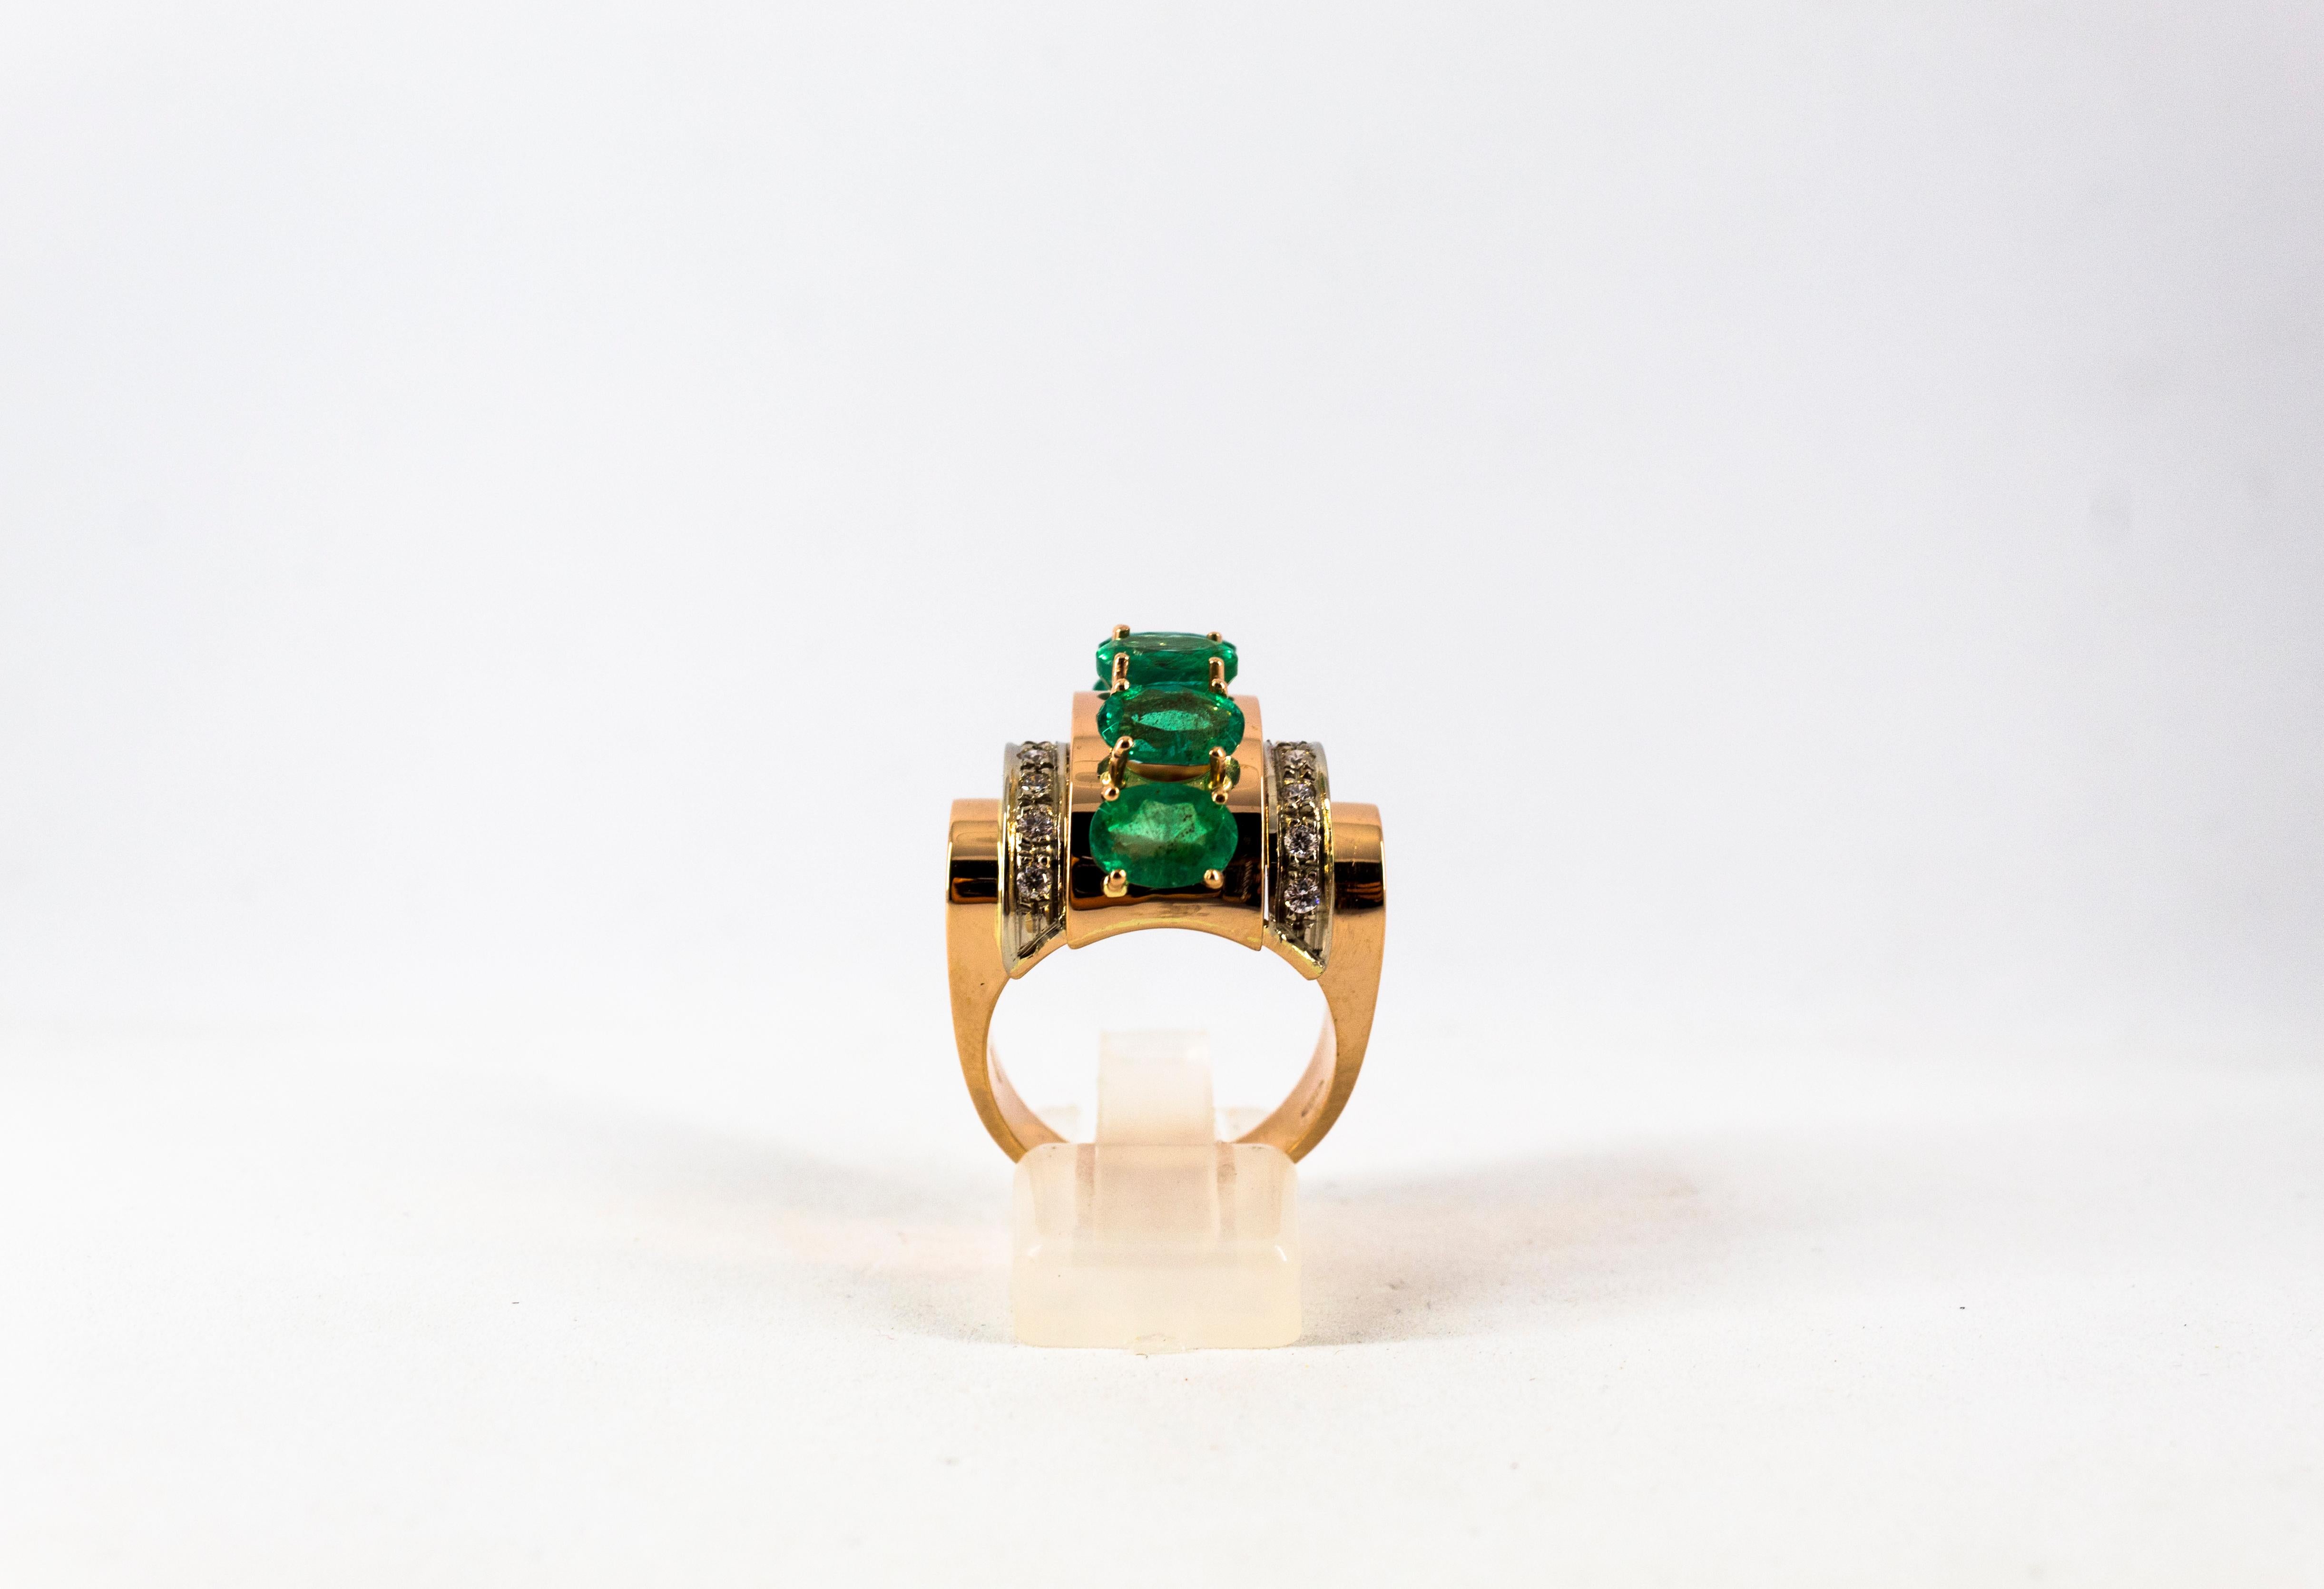 This Ring is made of 14K Yellow Gold.
This Ring has 0.30 Carats of White Modern Round Cut Diamonds.
This Ring has 5.00 Carats of Emeralds.
This Ring is available also with Rubies or Blue Sapphires.
Size ITA: 19 USA: 8 3/4
We're a workshop so every